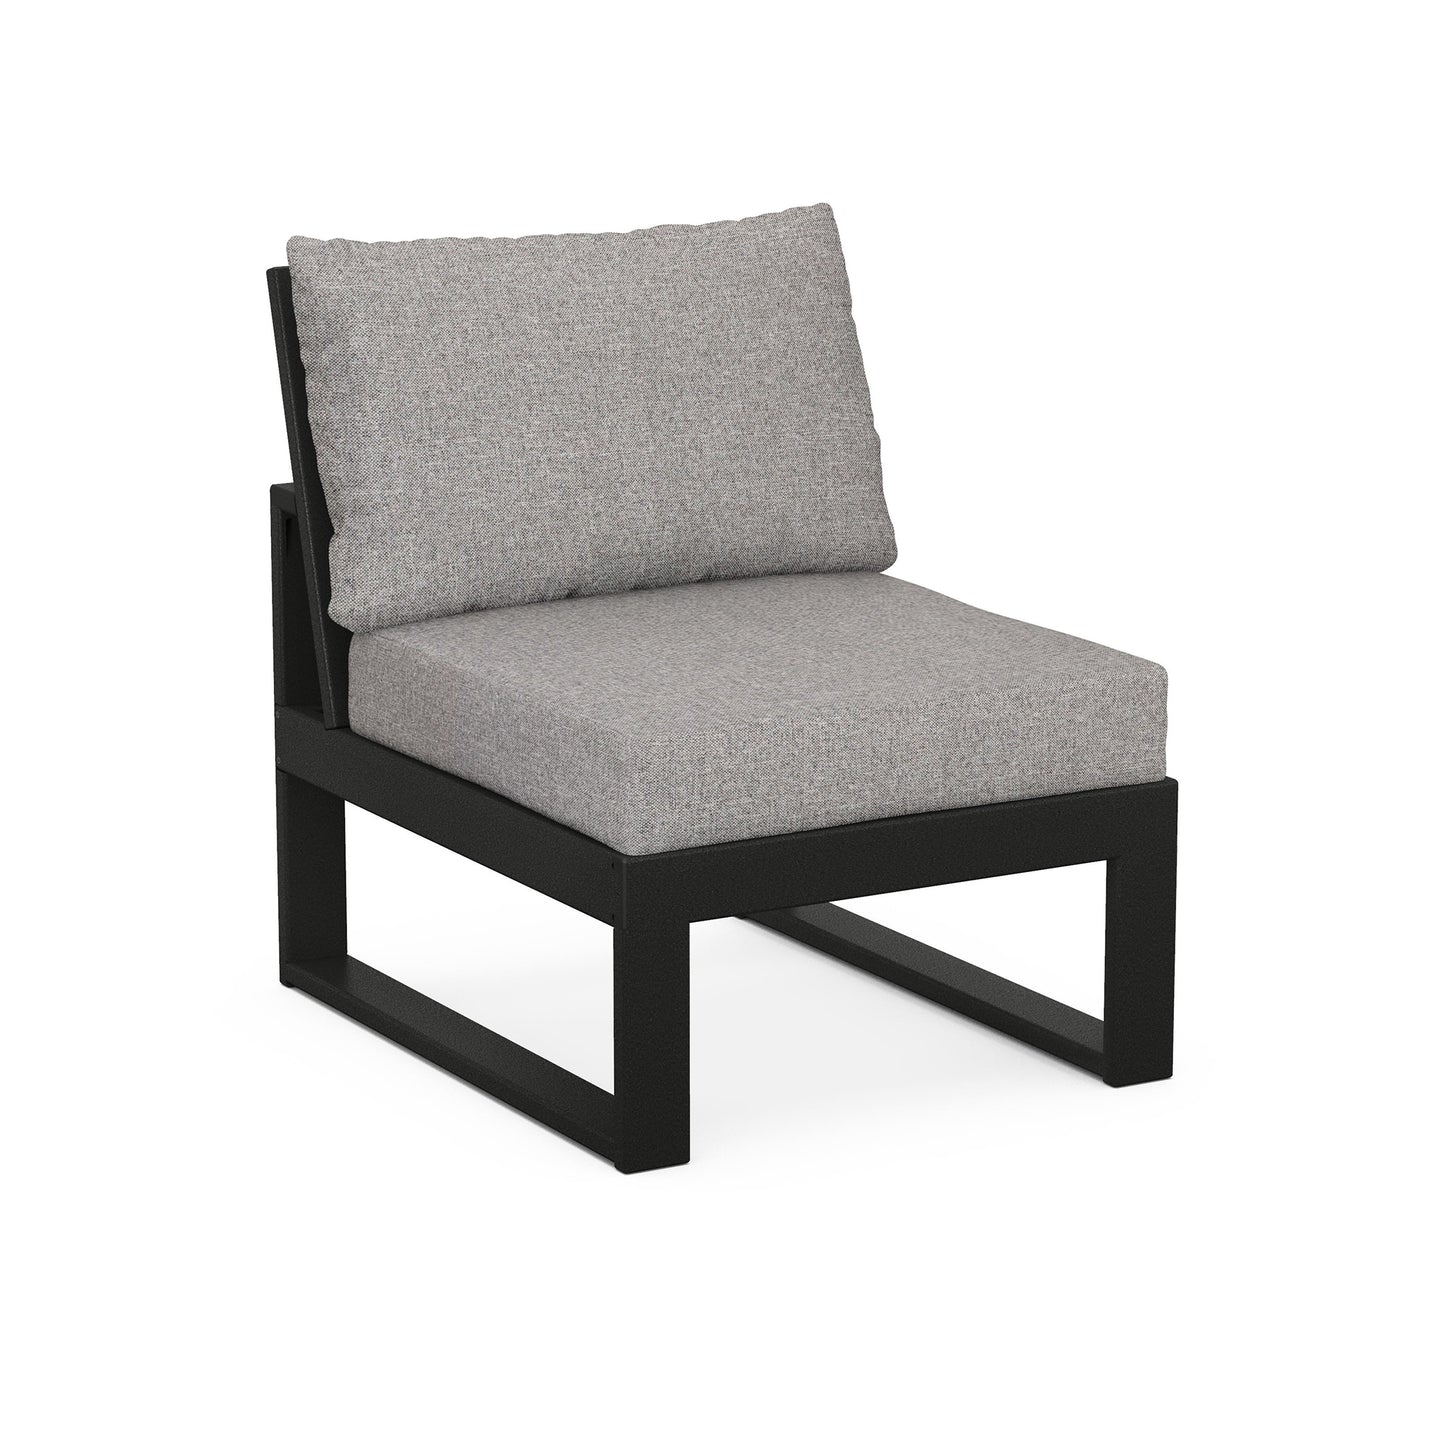 A modern outdoor lounge chair with a black frame and light gray cushions, branded as a POLYWOOD Modular Armless Chair, isolated on a white background.